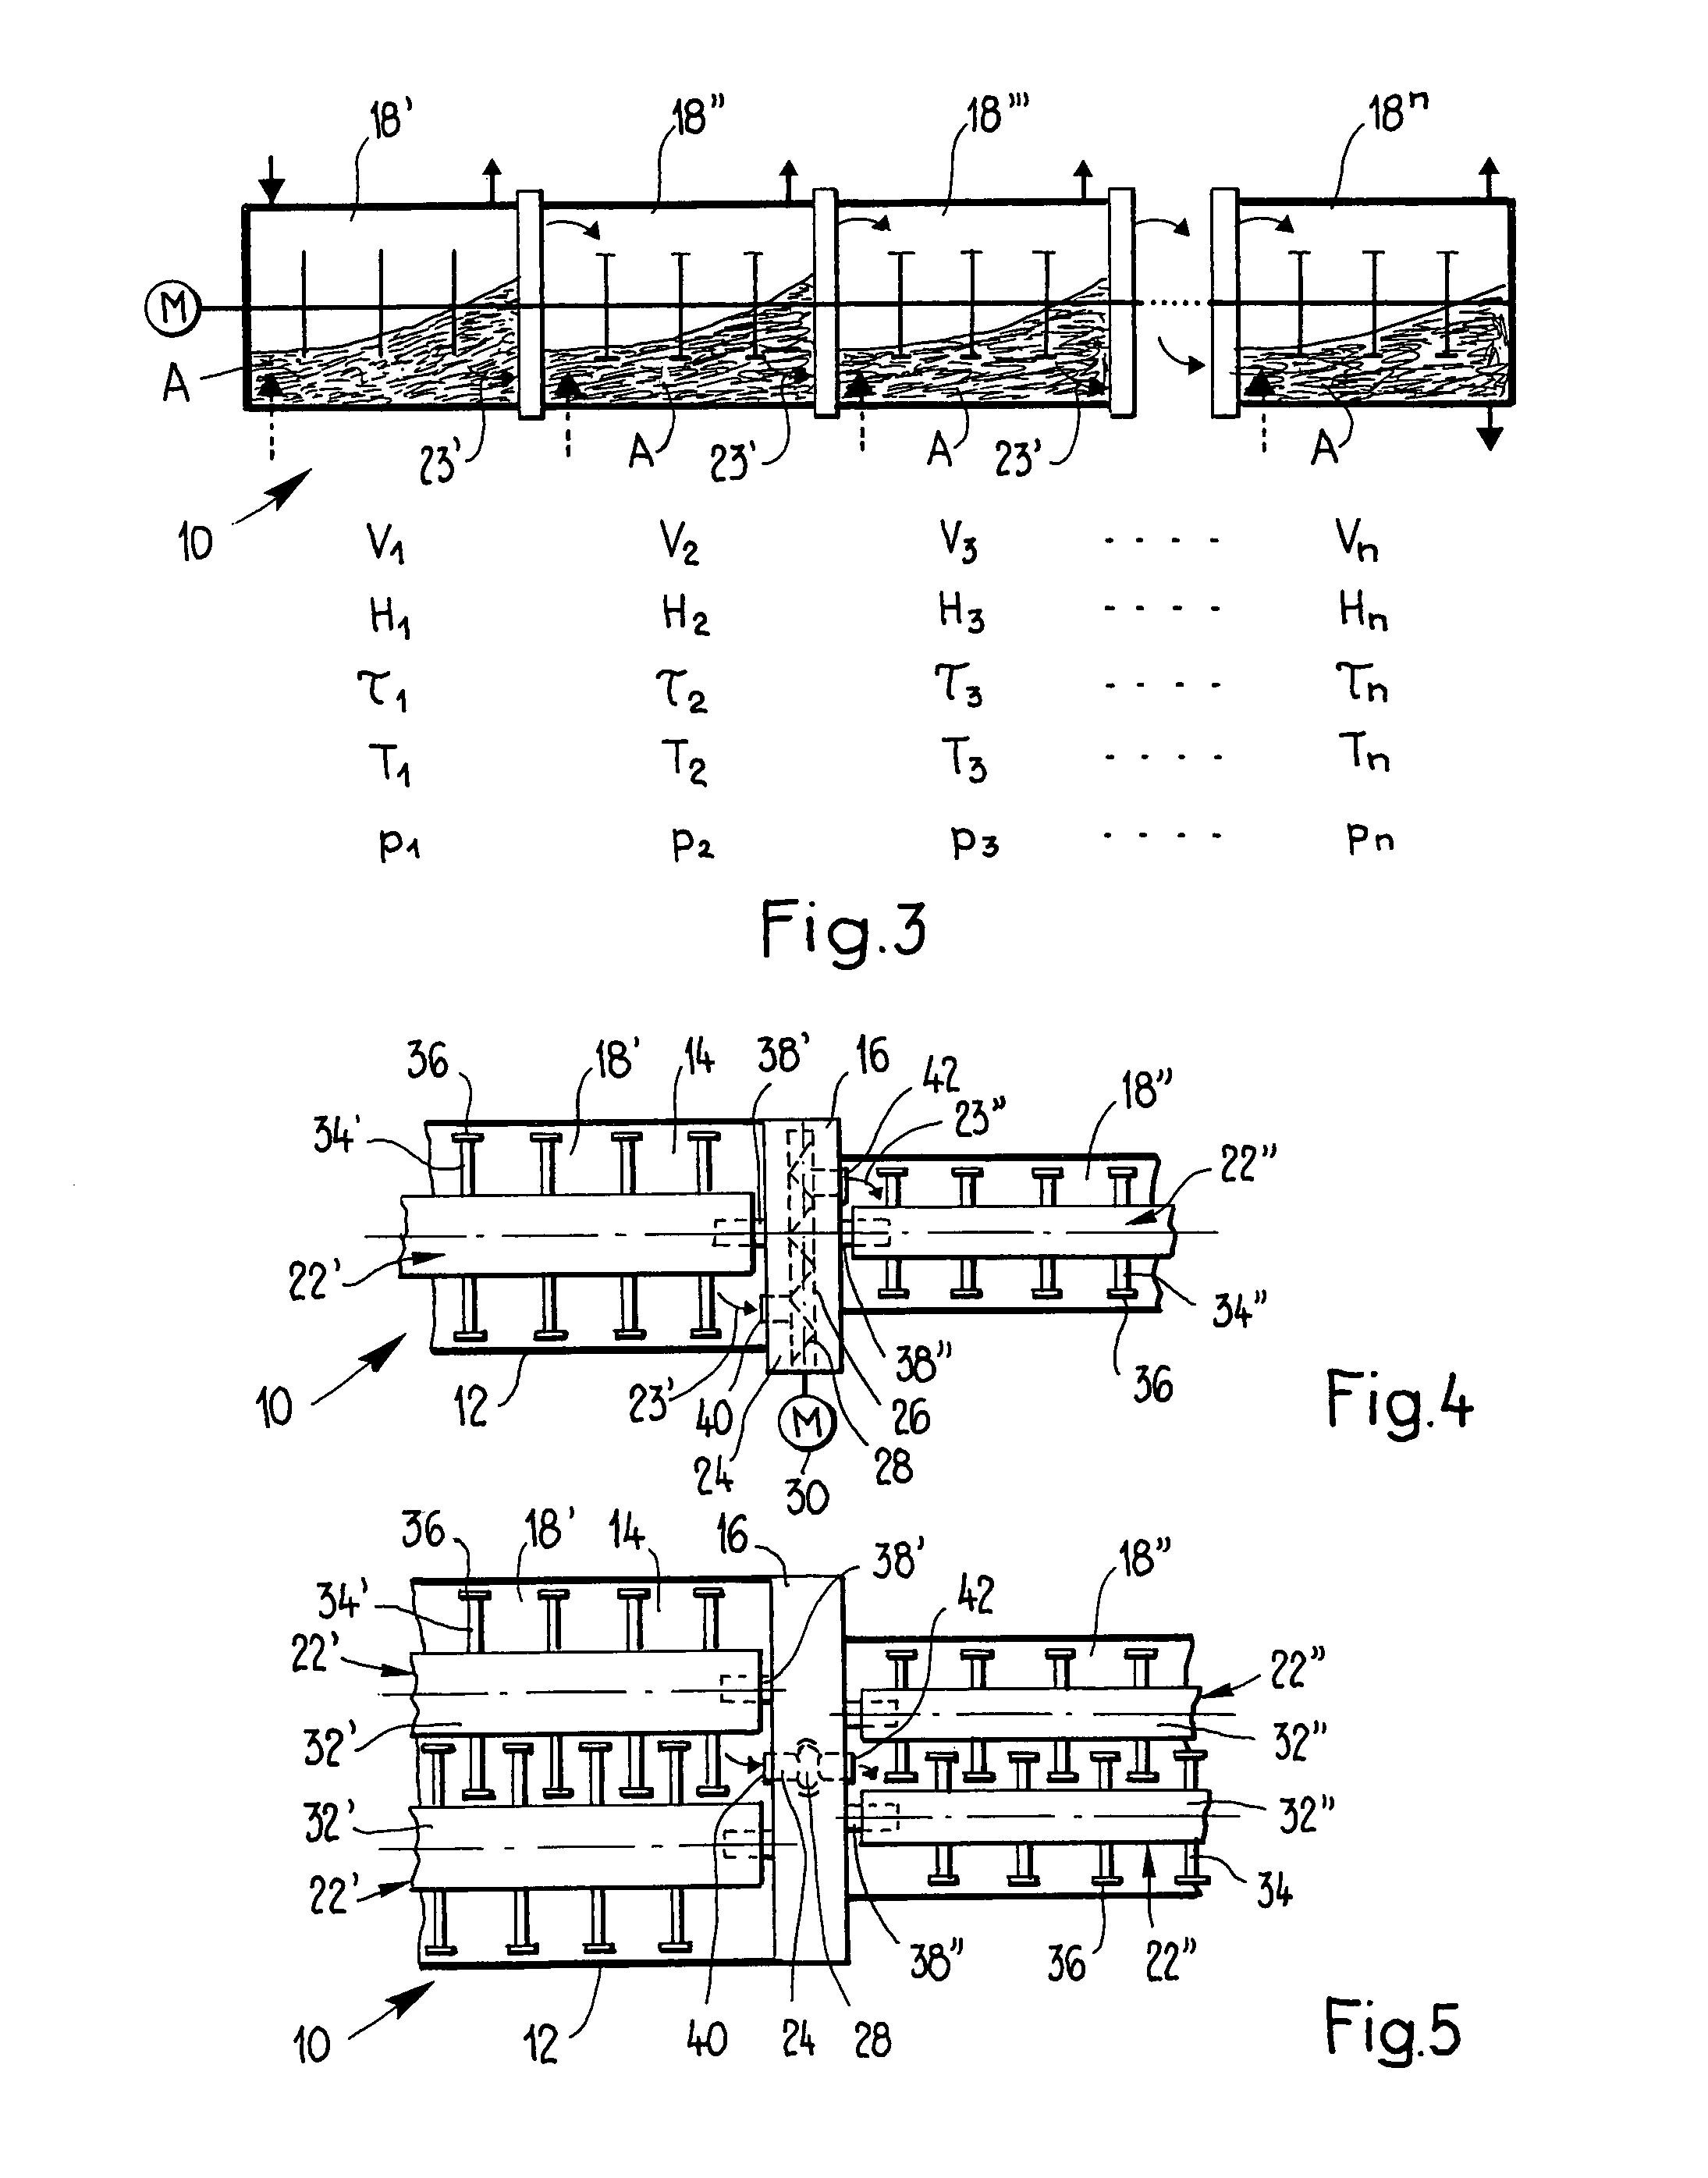 Large-volume reactor having a plurality of process spaces